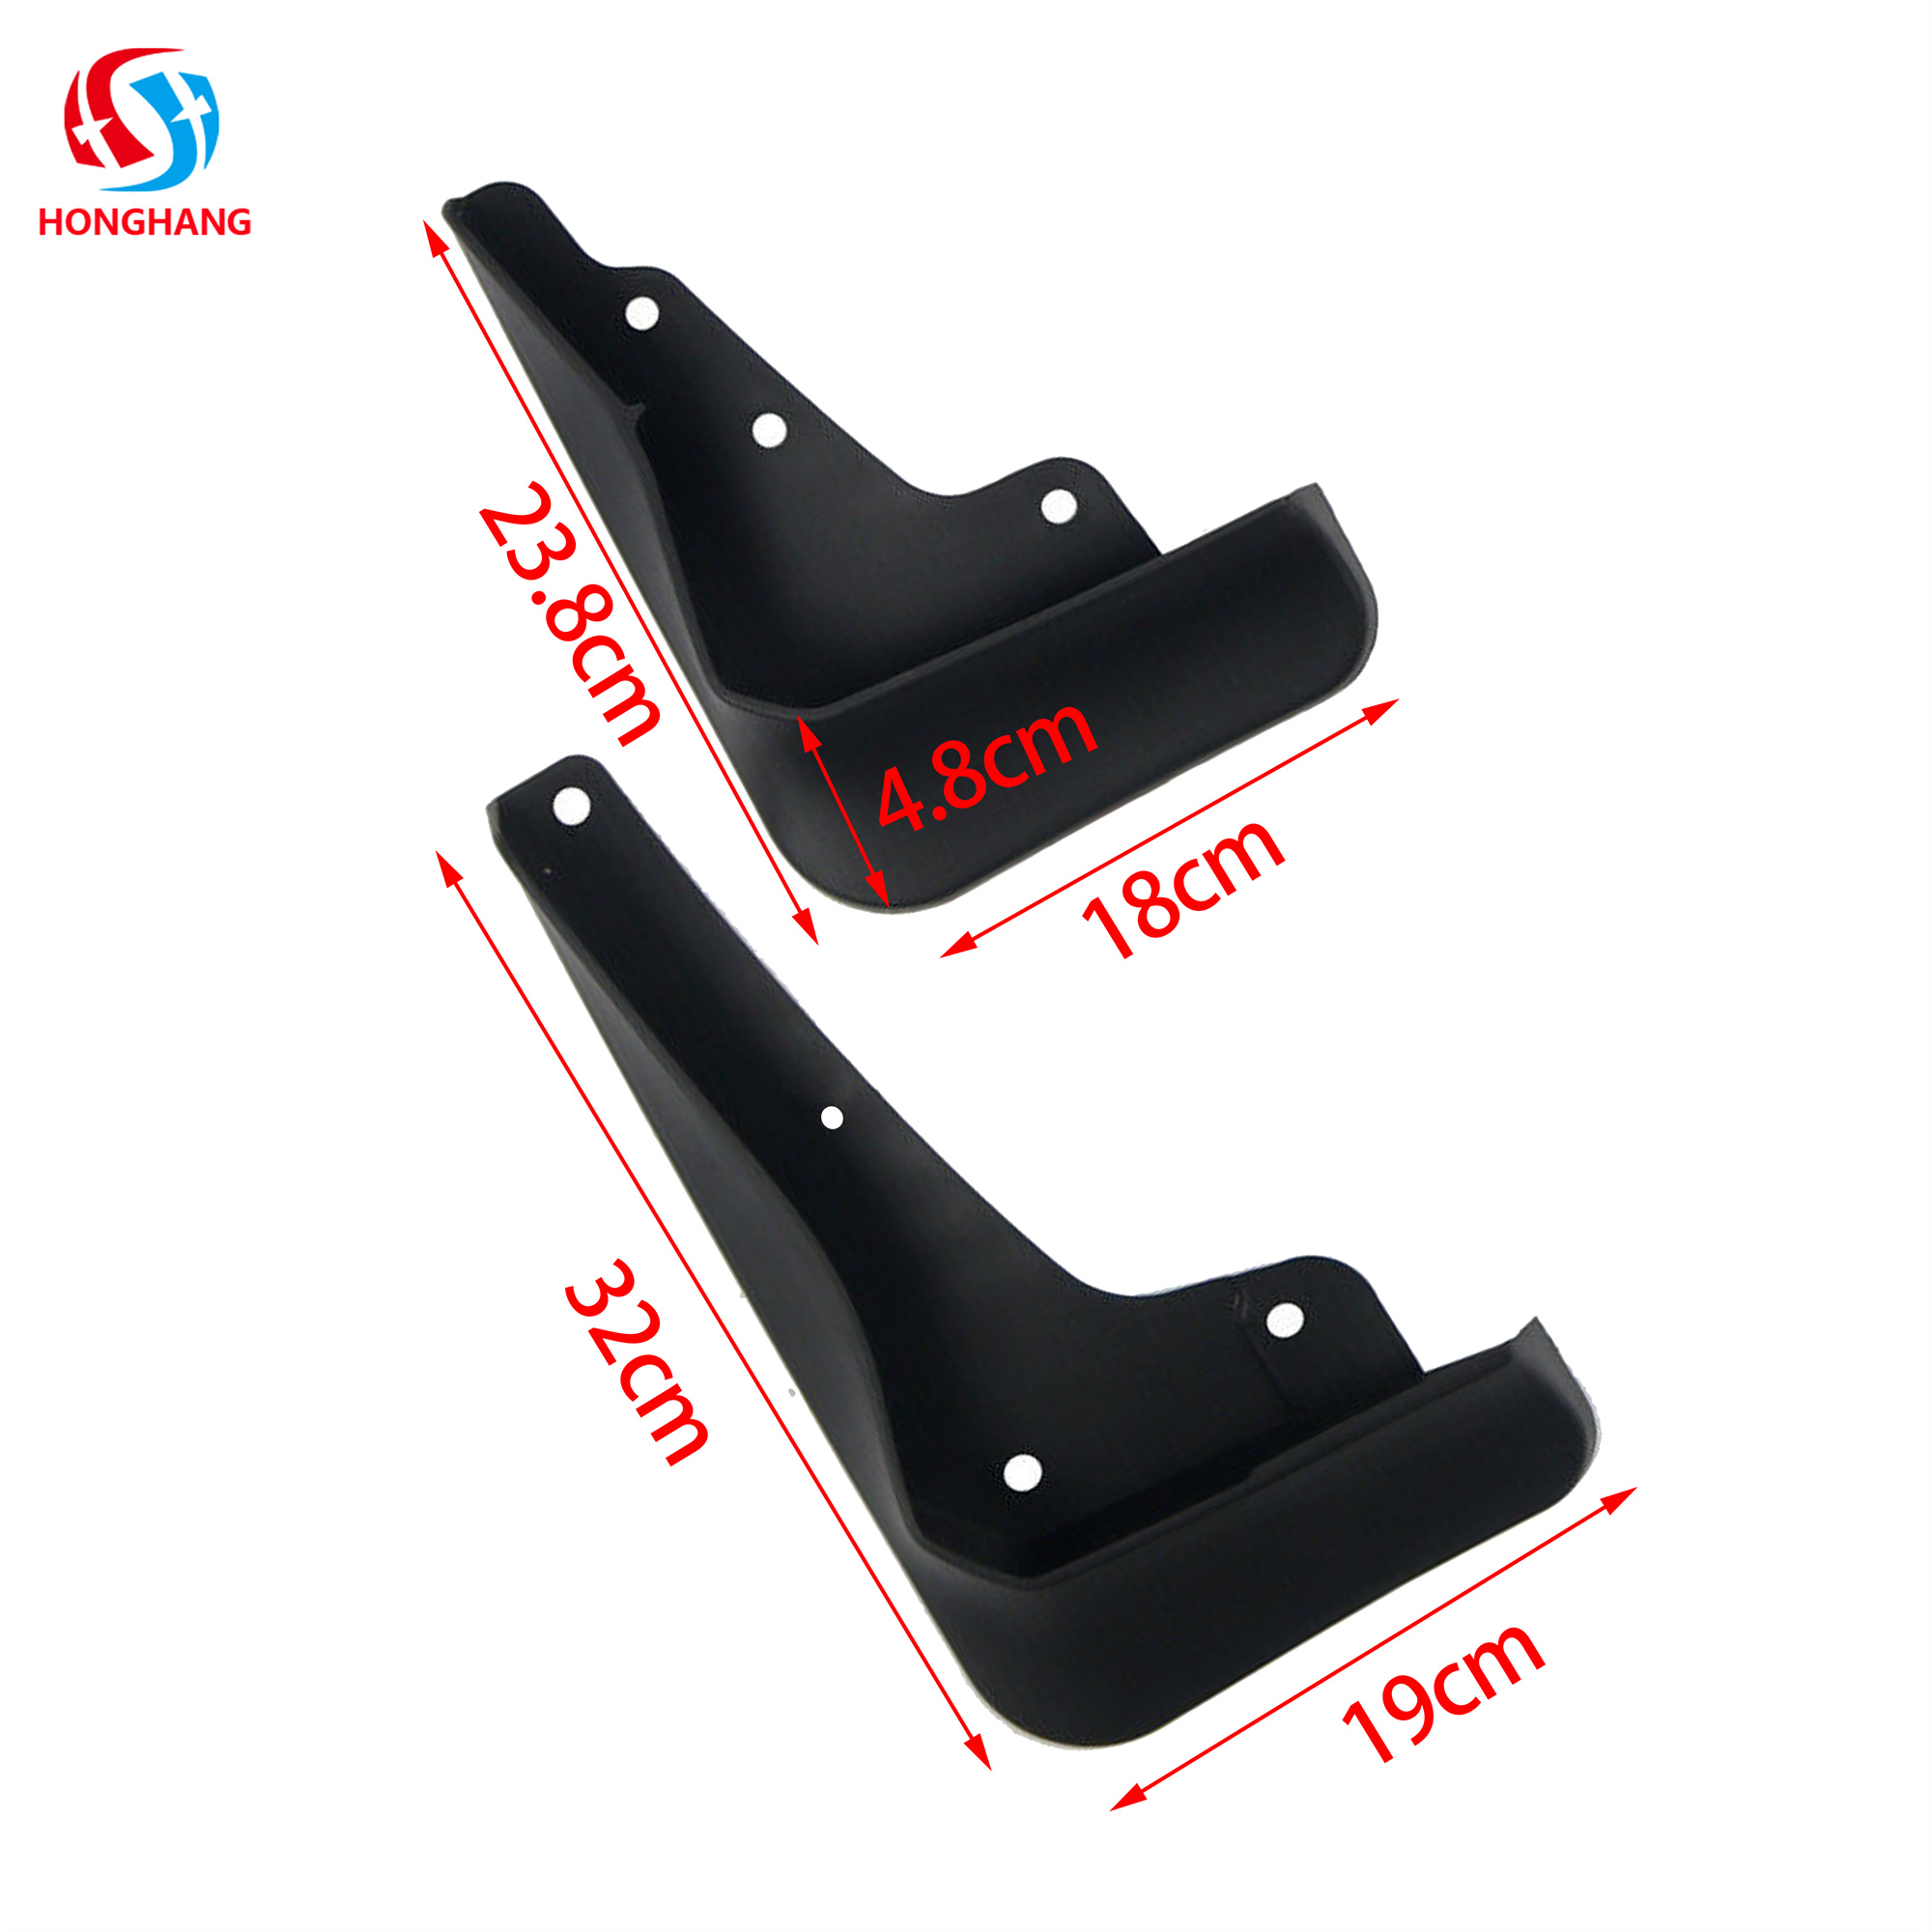 Auto Parts Mud Flap High Configuration for Dodge Charger